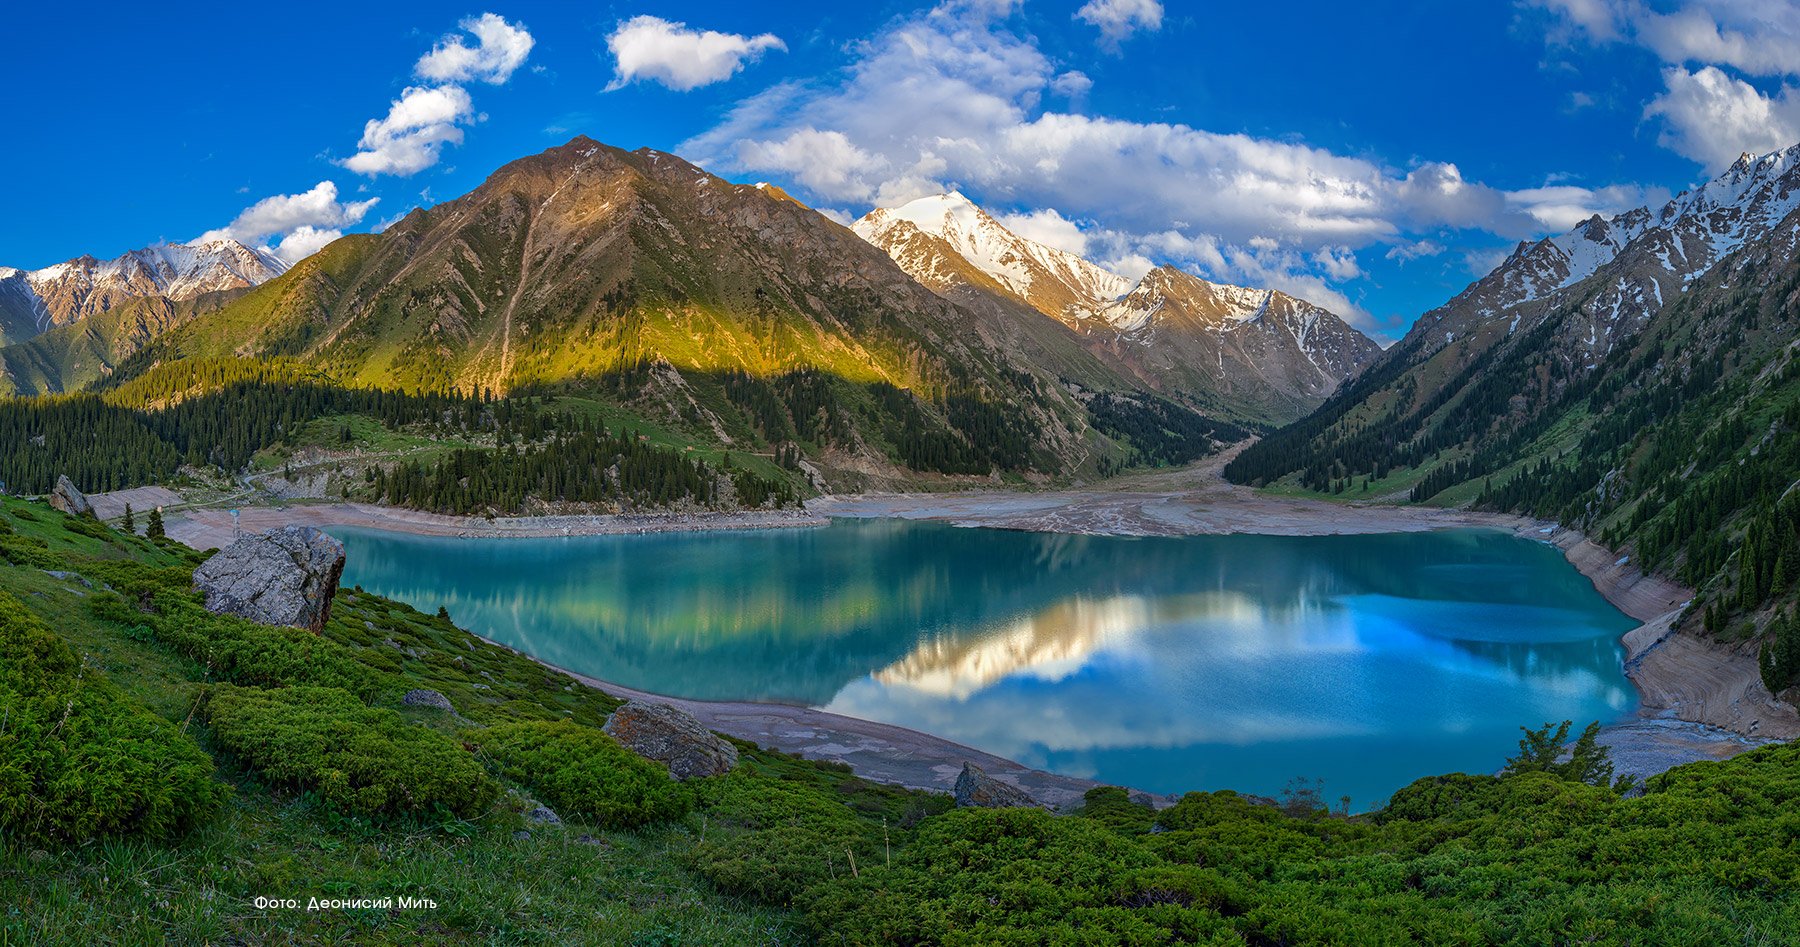  Kazakhstan entered the list of countries that are attractive for tourists